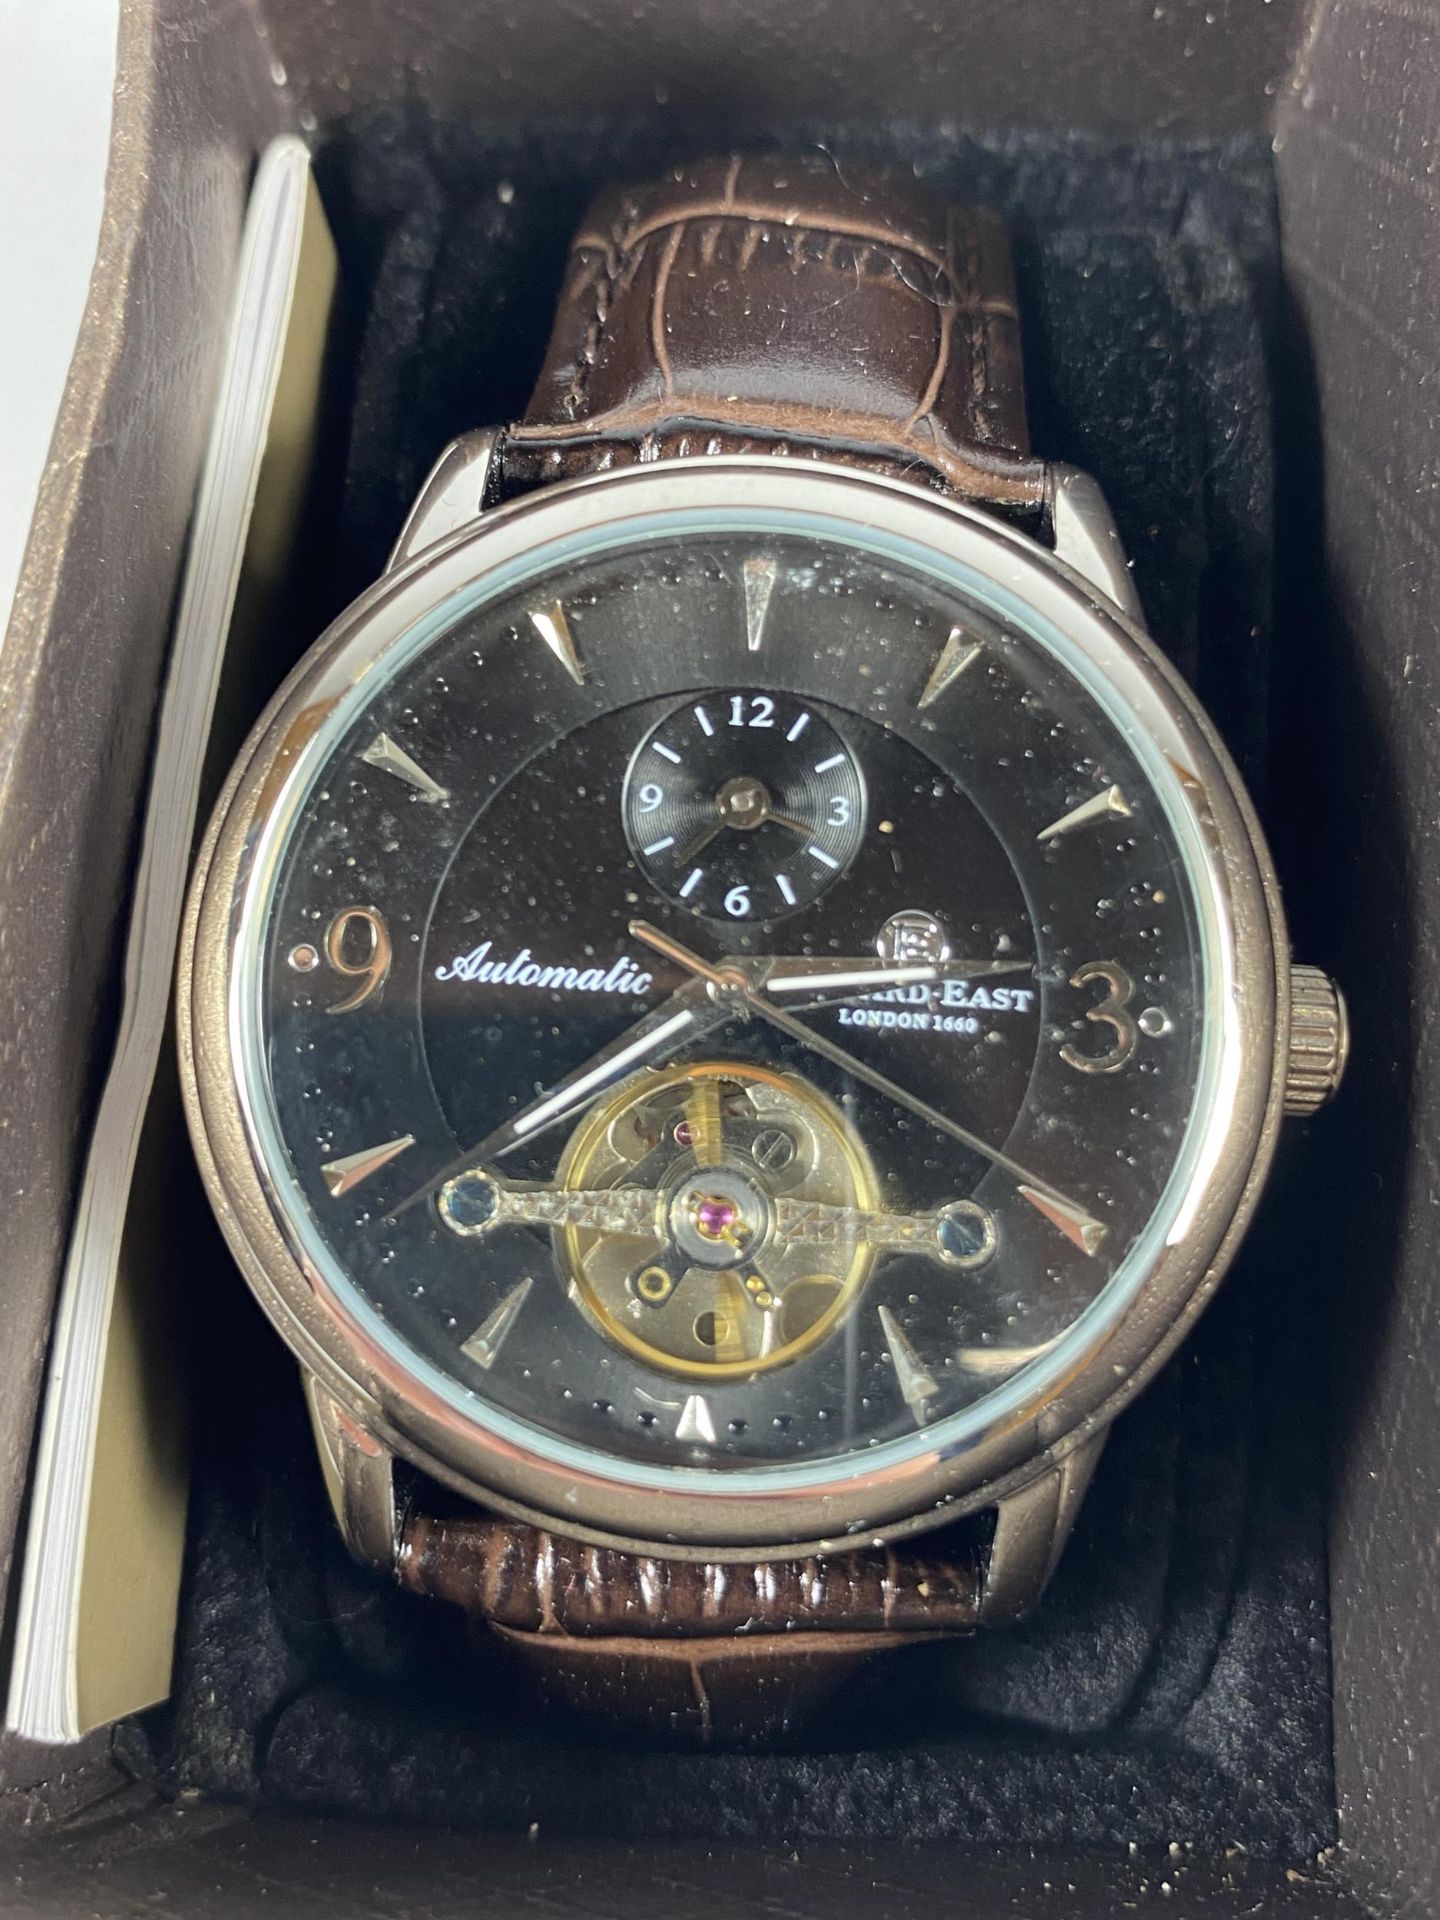 A GENTS BOXED EDWARD EAST, LONDON WATCH - Image 2 of 3